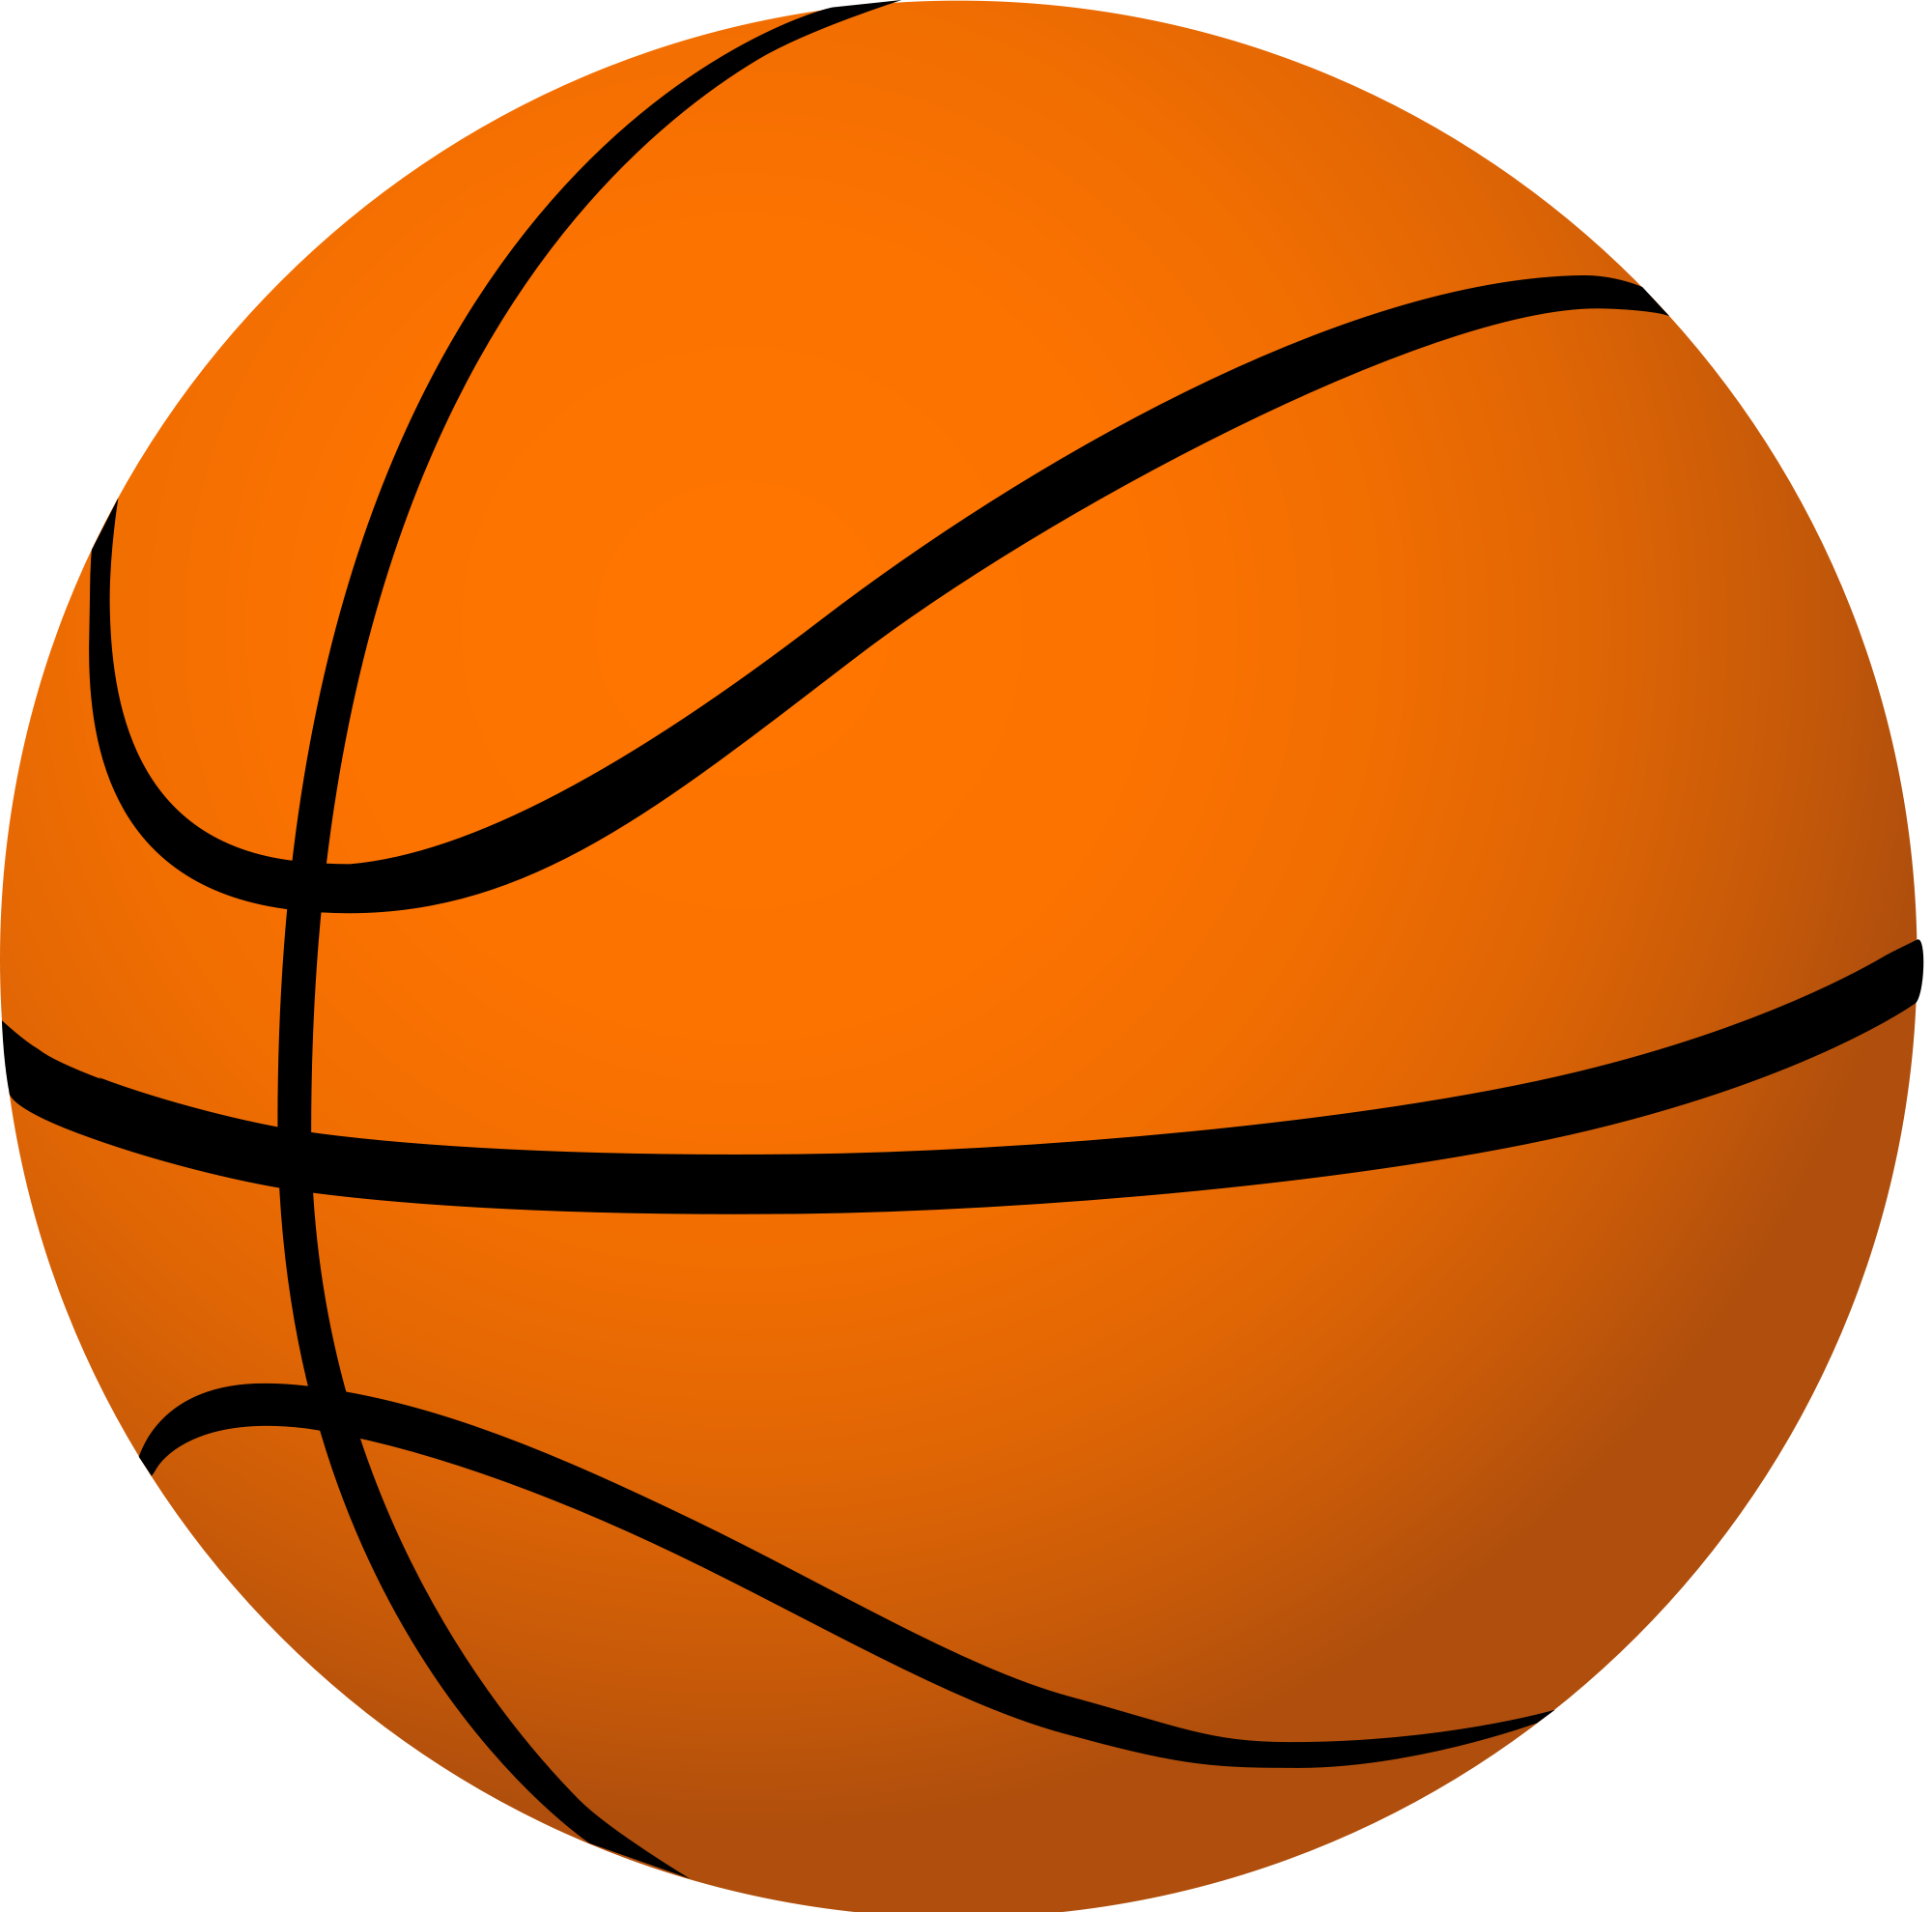 Basketball clip art free basketball clipart to use for party image